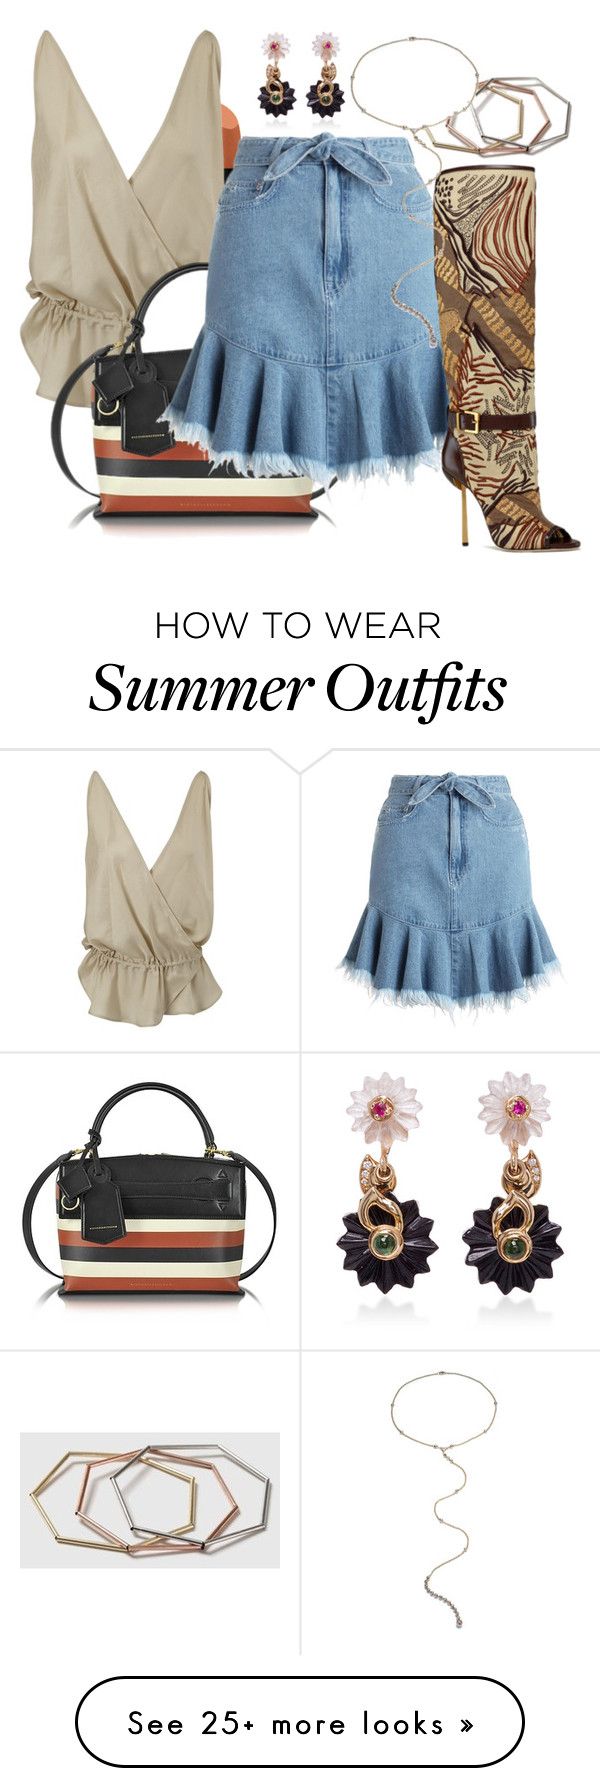 "OUTFIT N°42" by sephonmore on Polyvore featuring Topshop, Wunderkind...